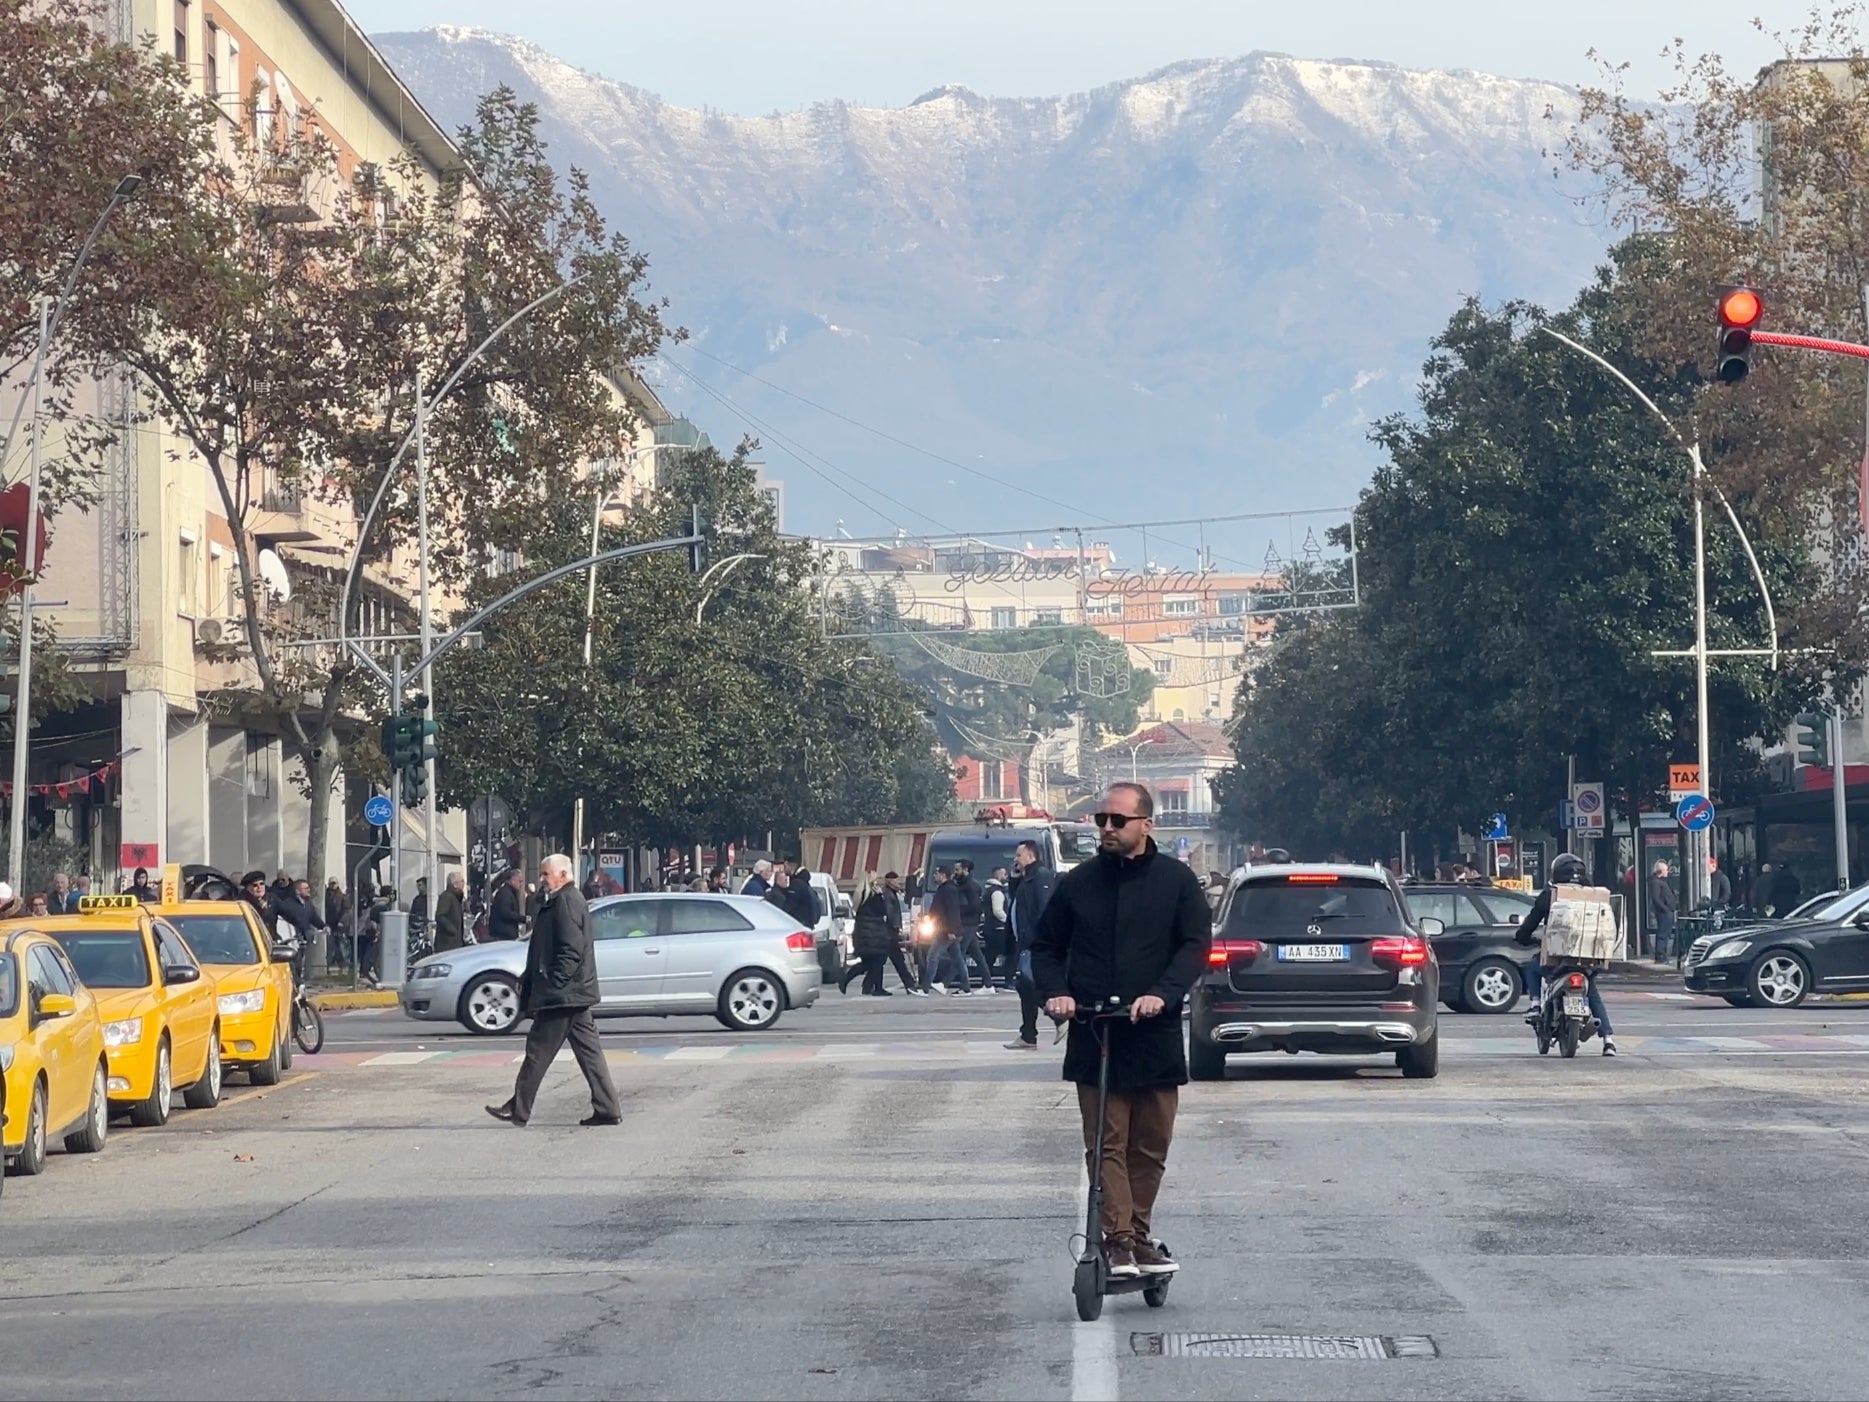 Opening up: Tirana street scene, dominated by snow-capped mountains